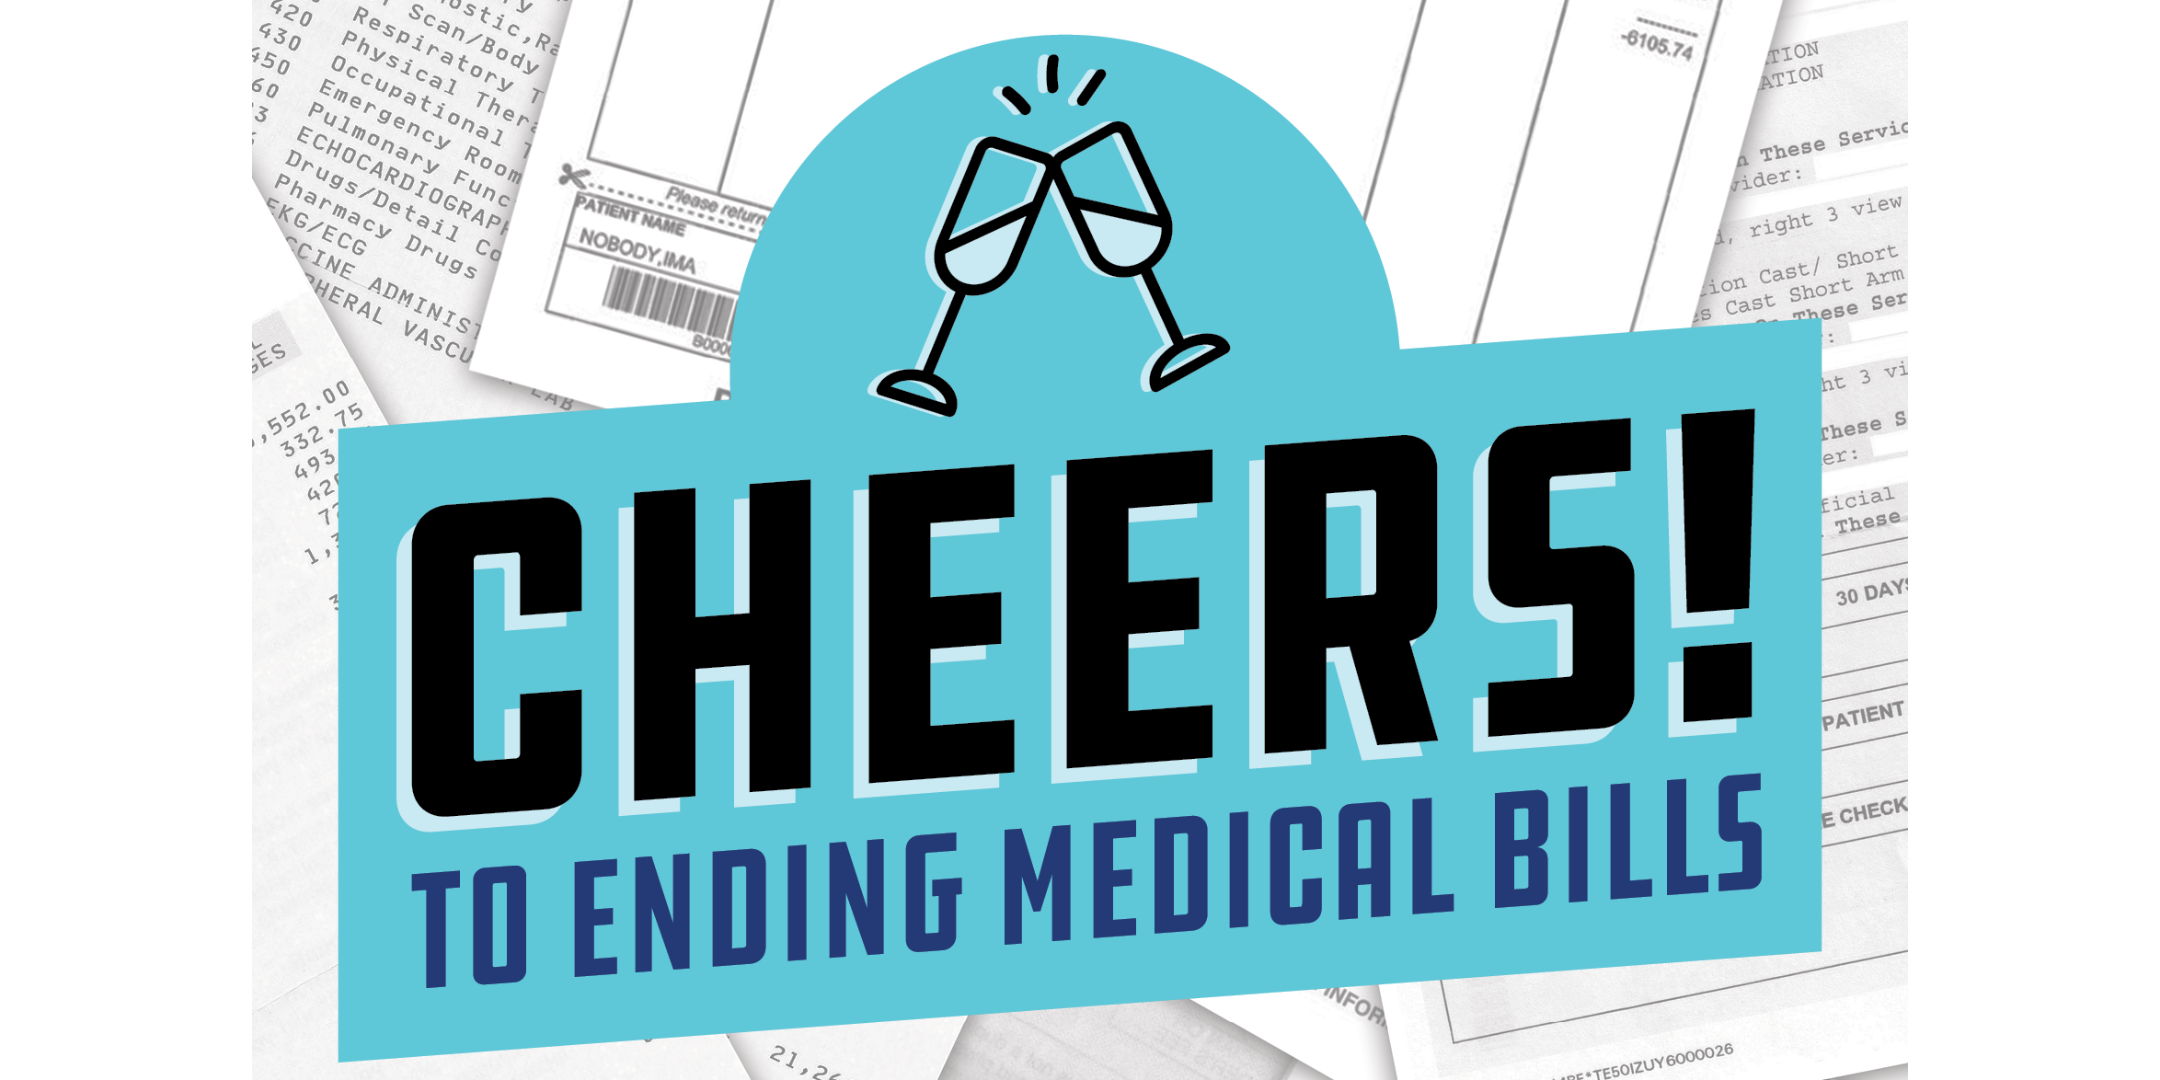 Cheers to Ending Medical Bills: Fundraiser for Medicare for All and Robin